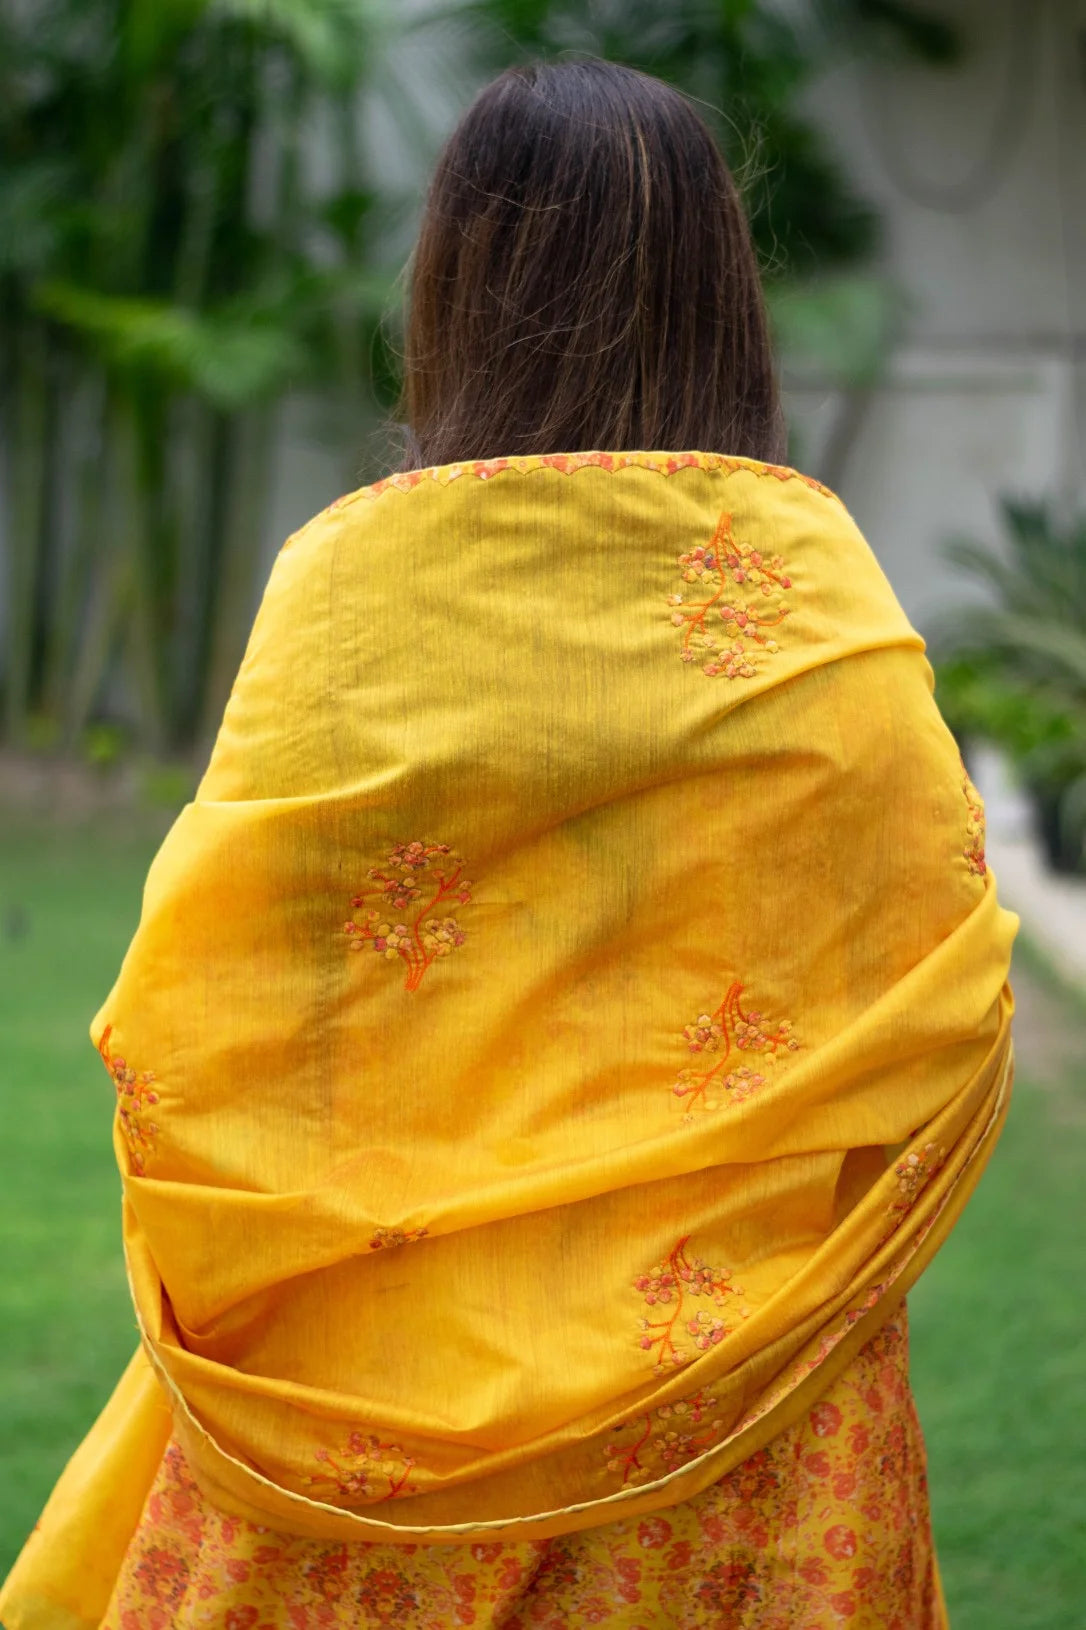 This beautiful Chanderi Kurta in yellow adds a pop of color to any wardrobe.